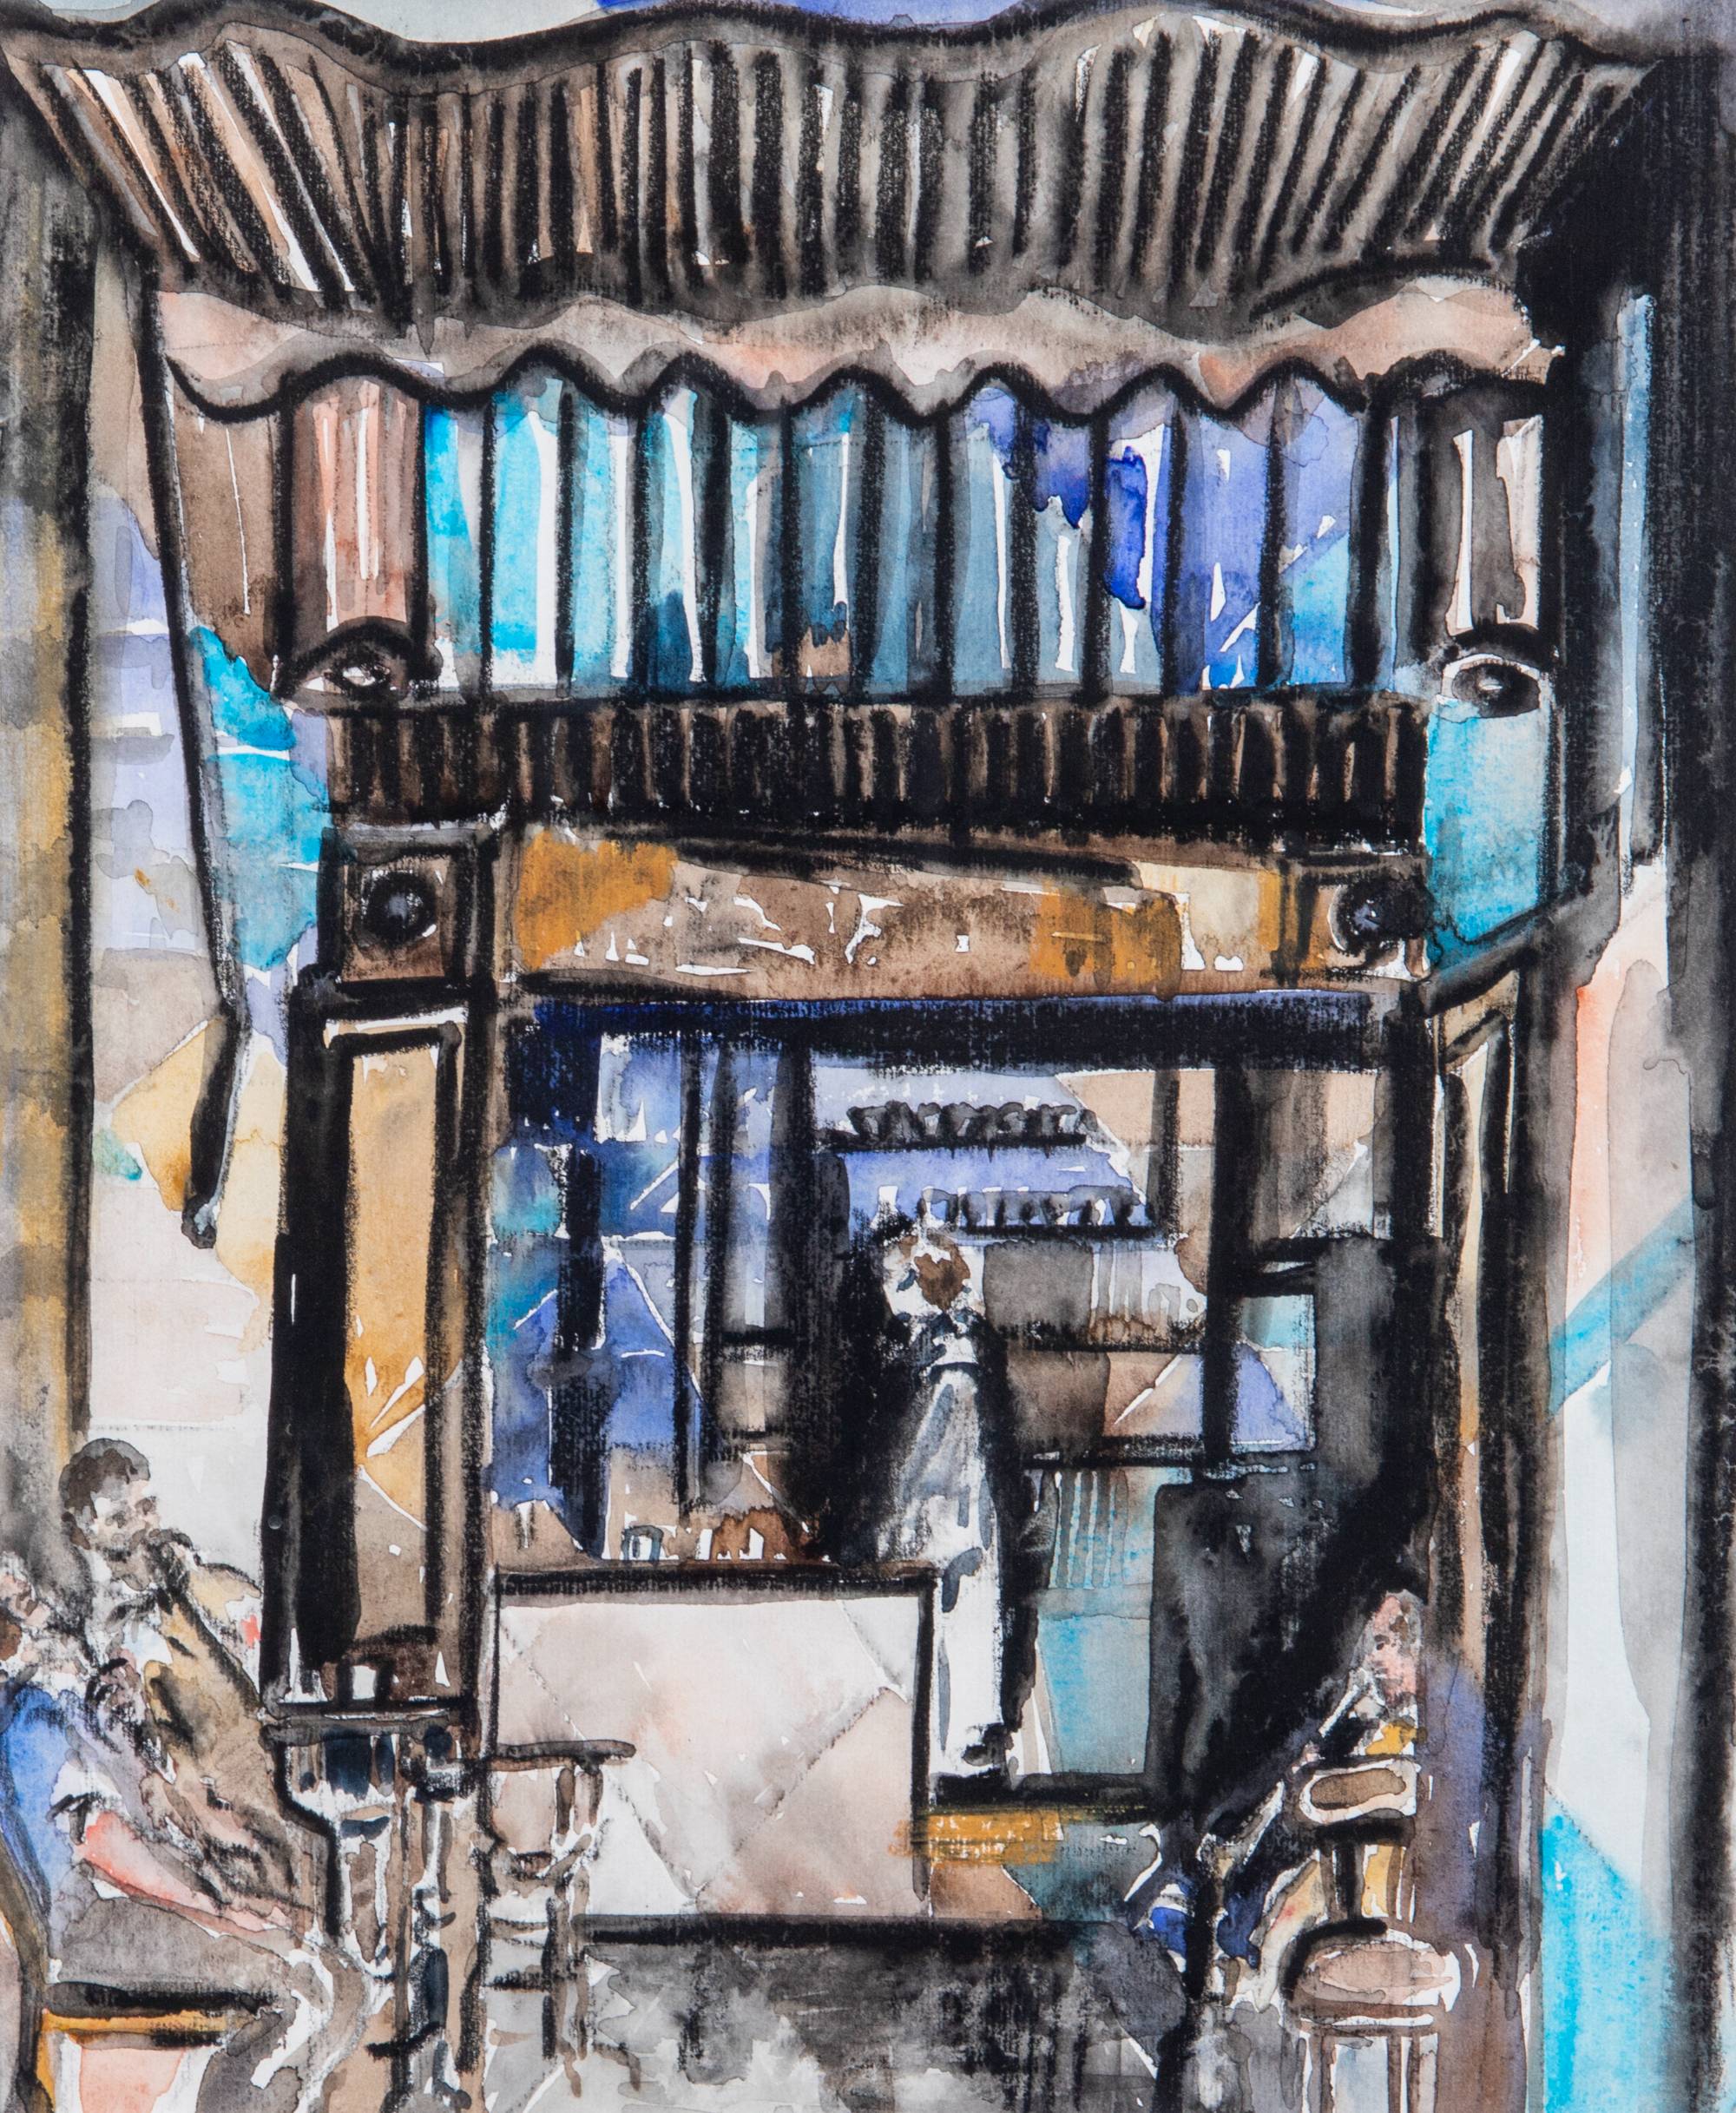 abstract painting of middle eastern shop vendor's stall